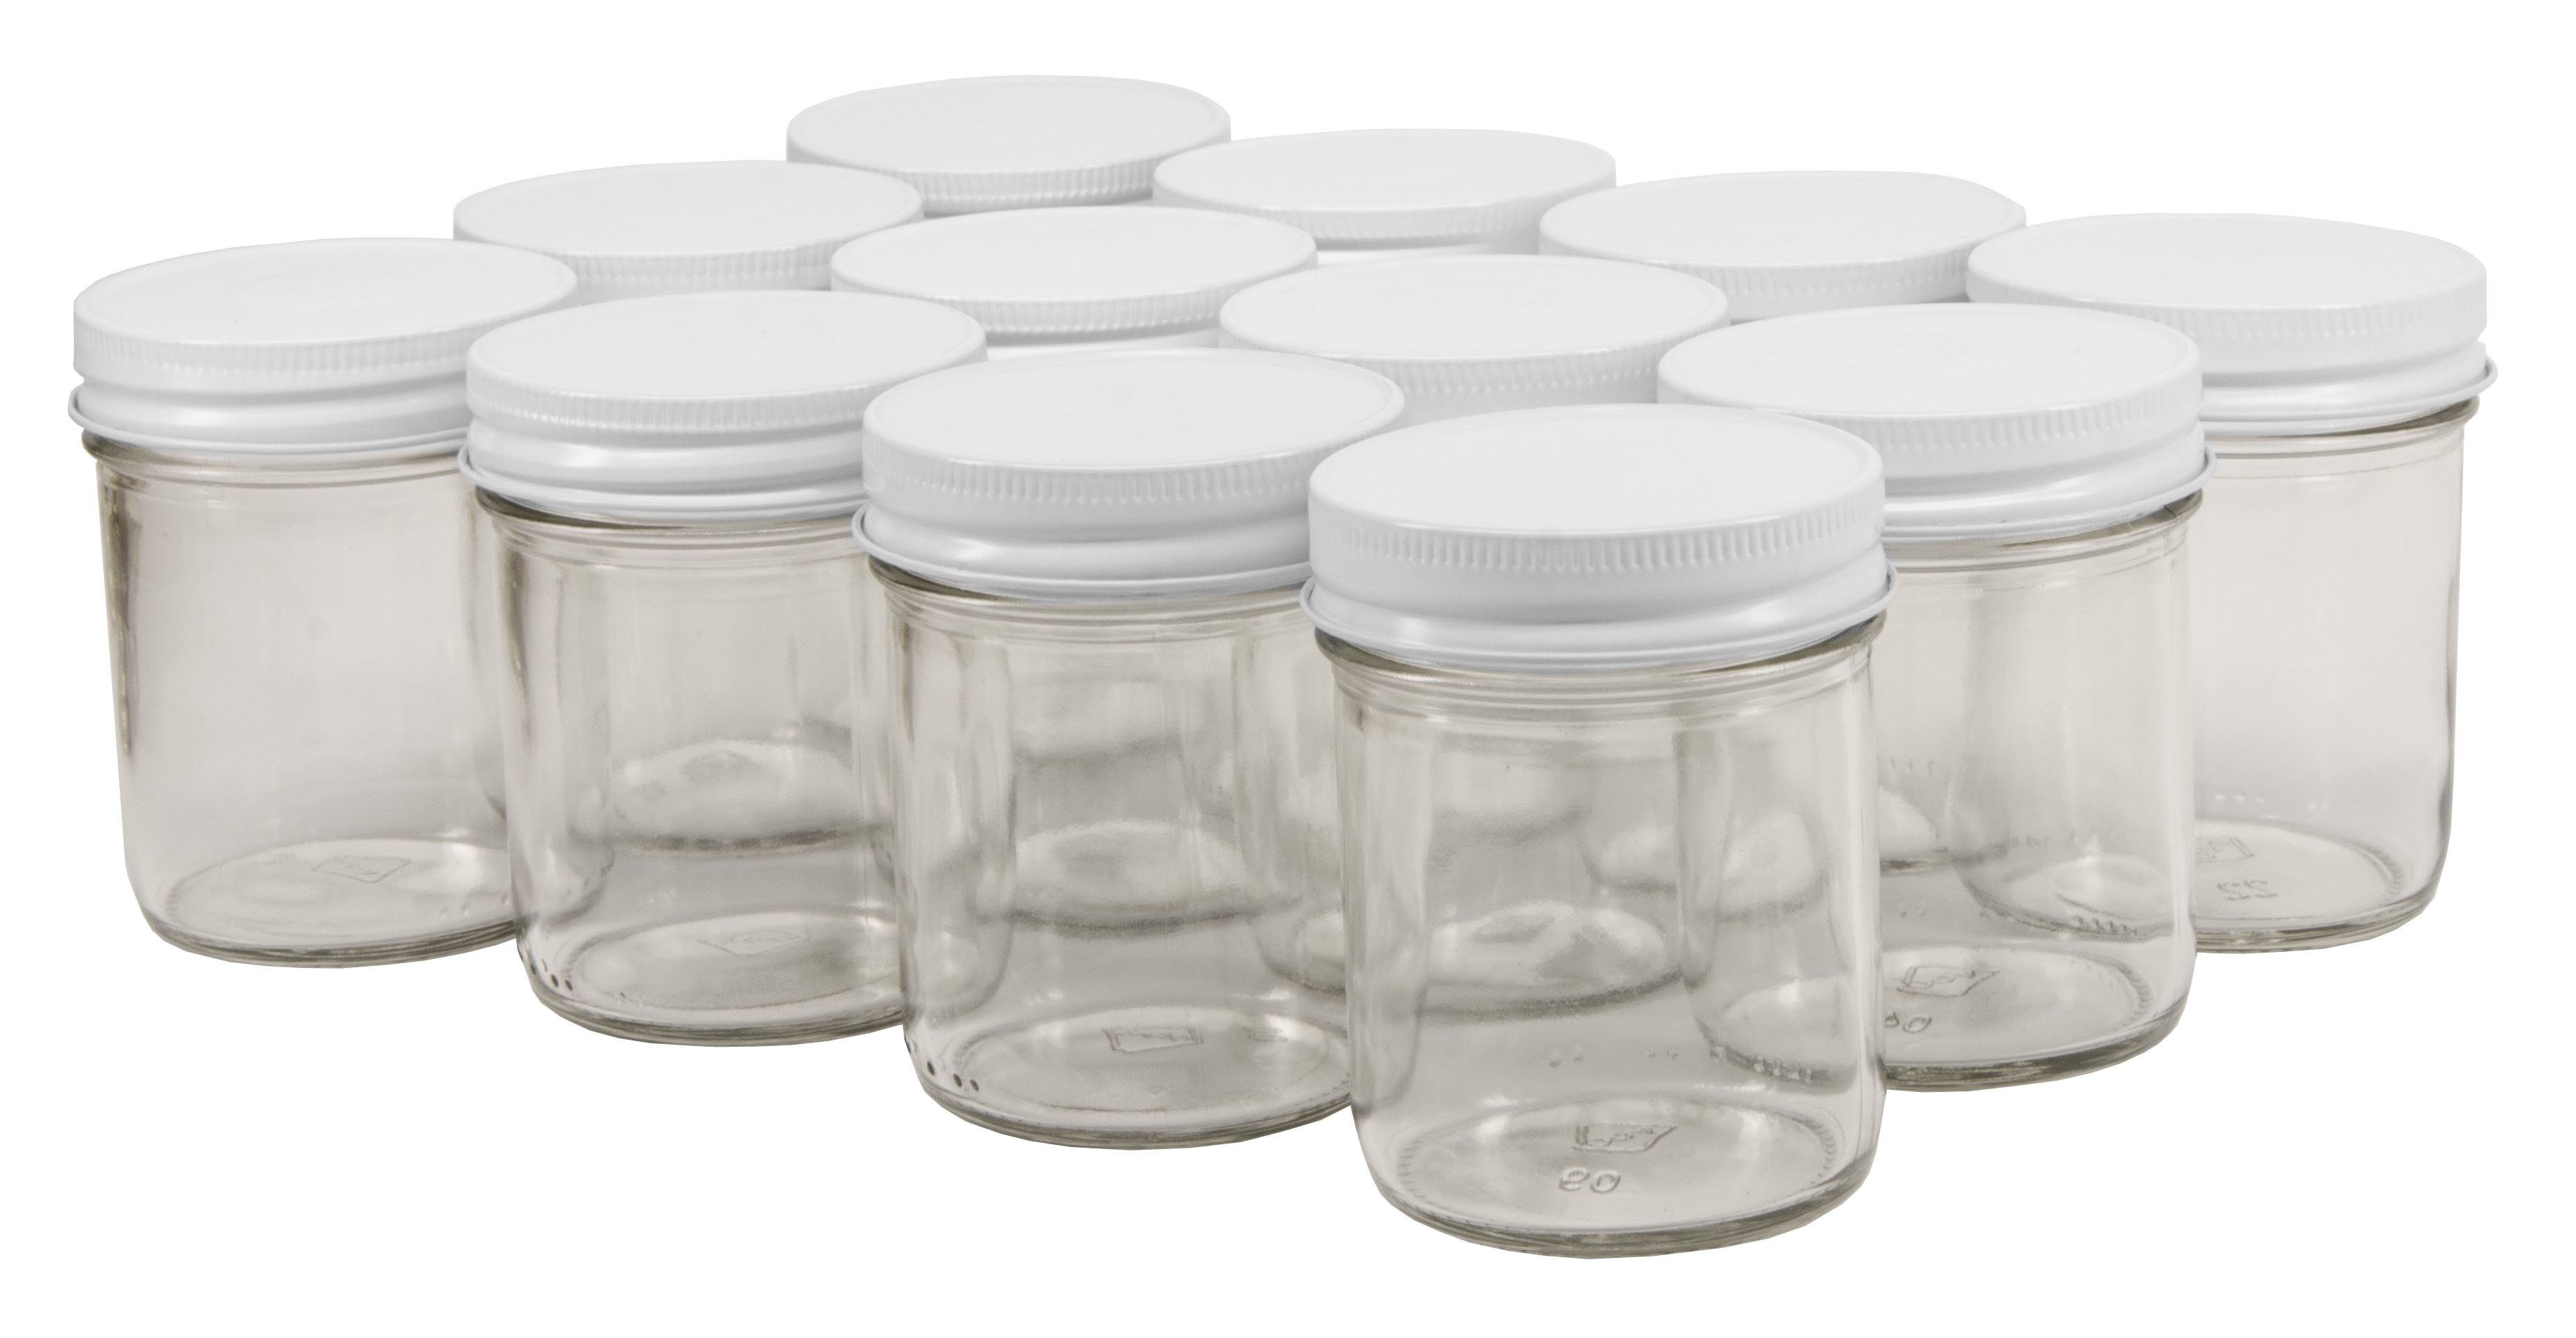 NMS 8 Ounce Glass Straight Sided Regular Mouth Canning Jars - Case